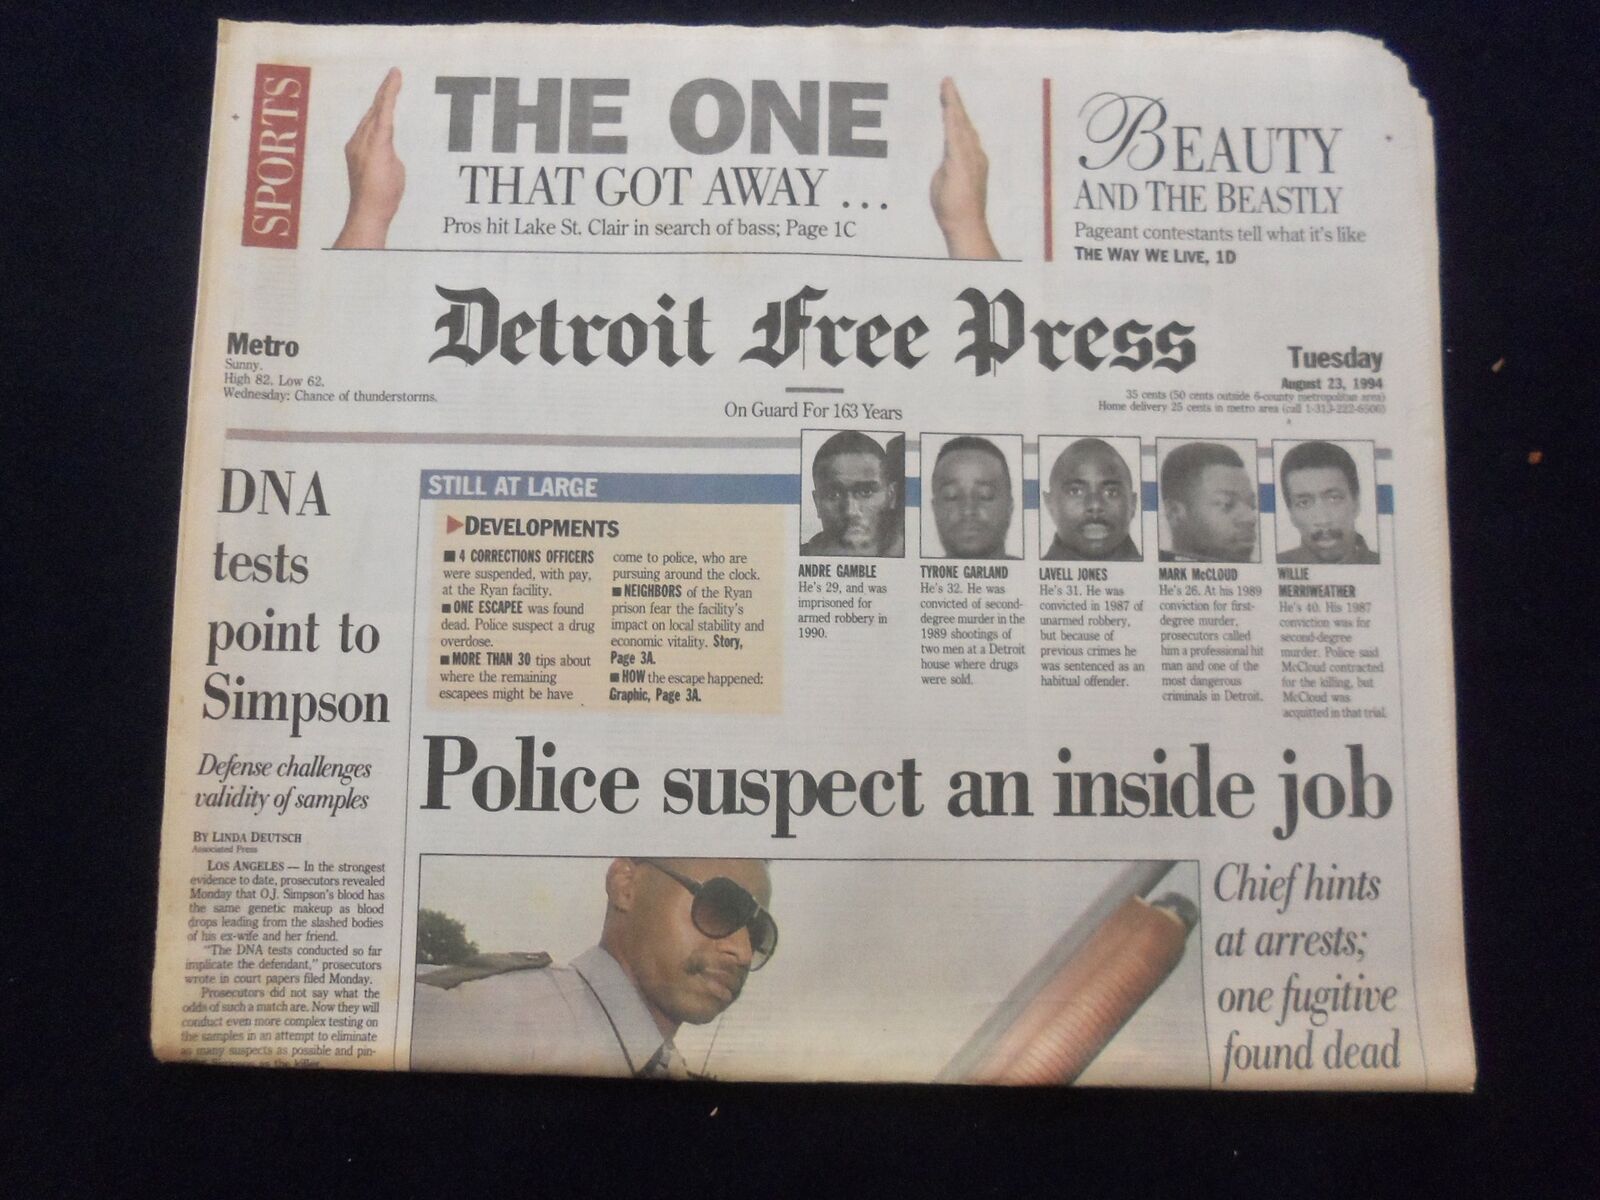 1994 AUG 23 DETROIT FREE PRESS NEWSPAPER - DNA TESTS POINT TO SIMPSON - NP 7245